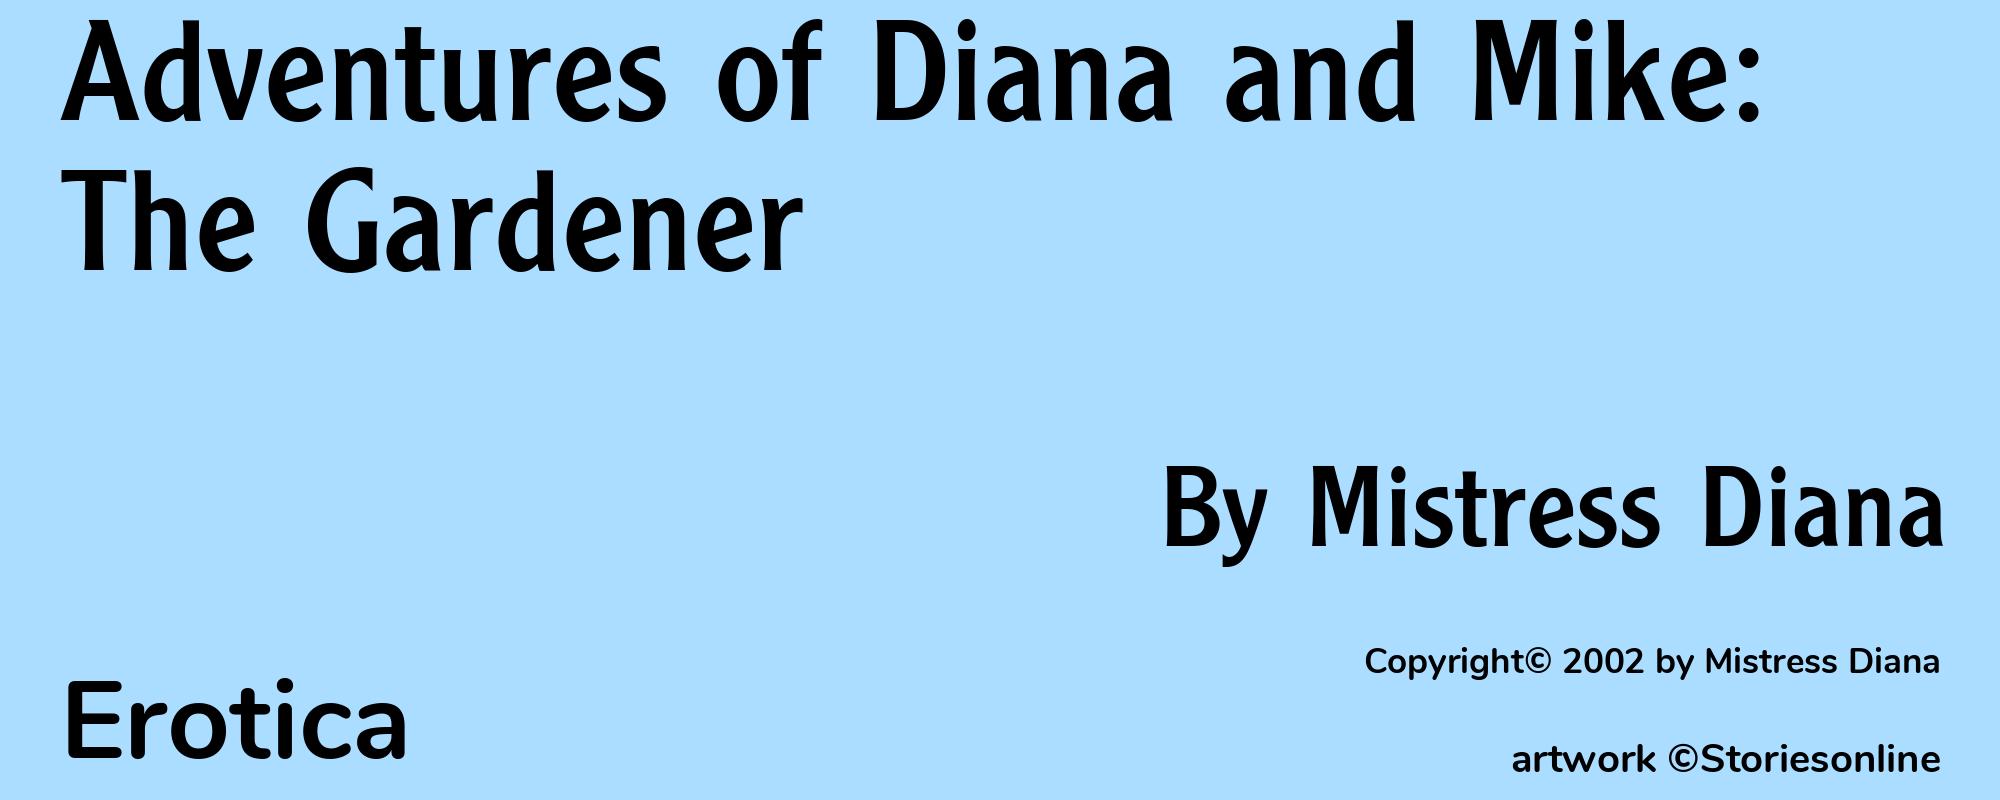 Adventures of Diana and Mike: The Gardener - Cover